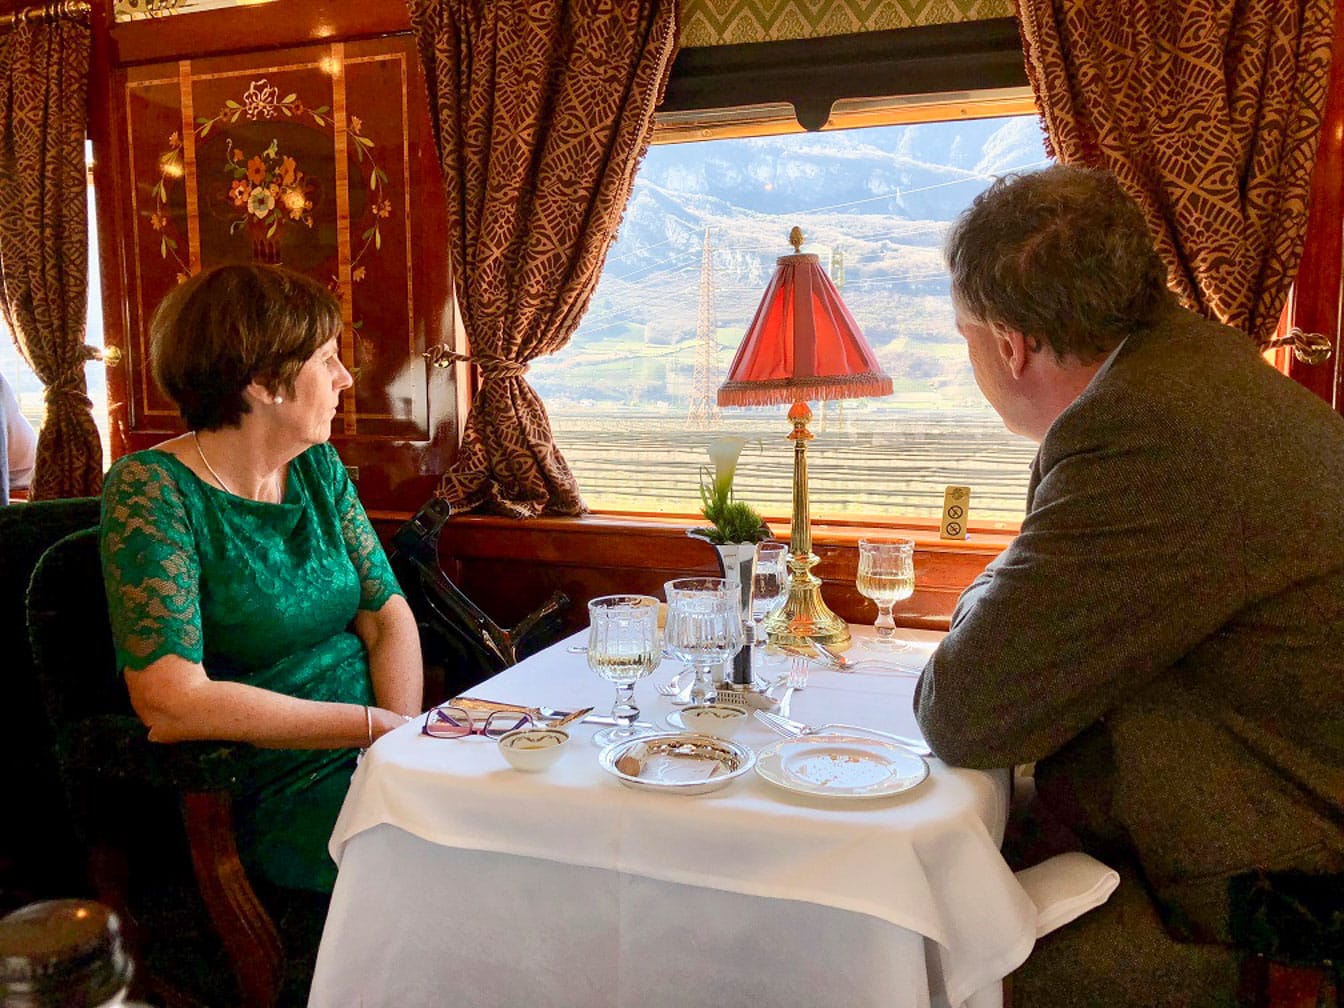 Guests dining on the Paris to Istanbul Annual Journey on the Venice Simplon-Orient-Express journey